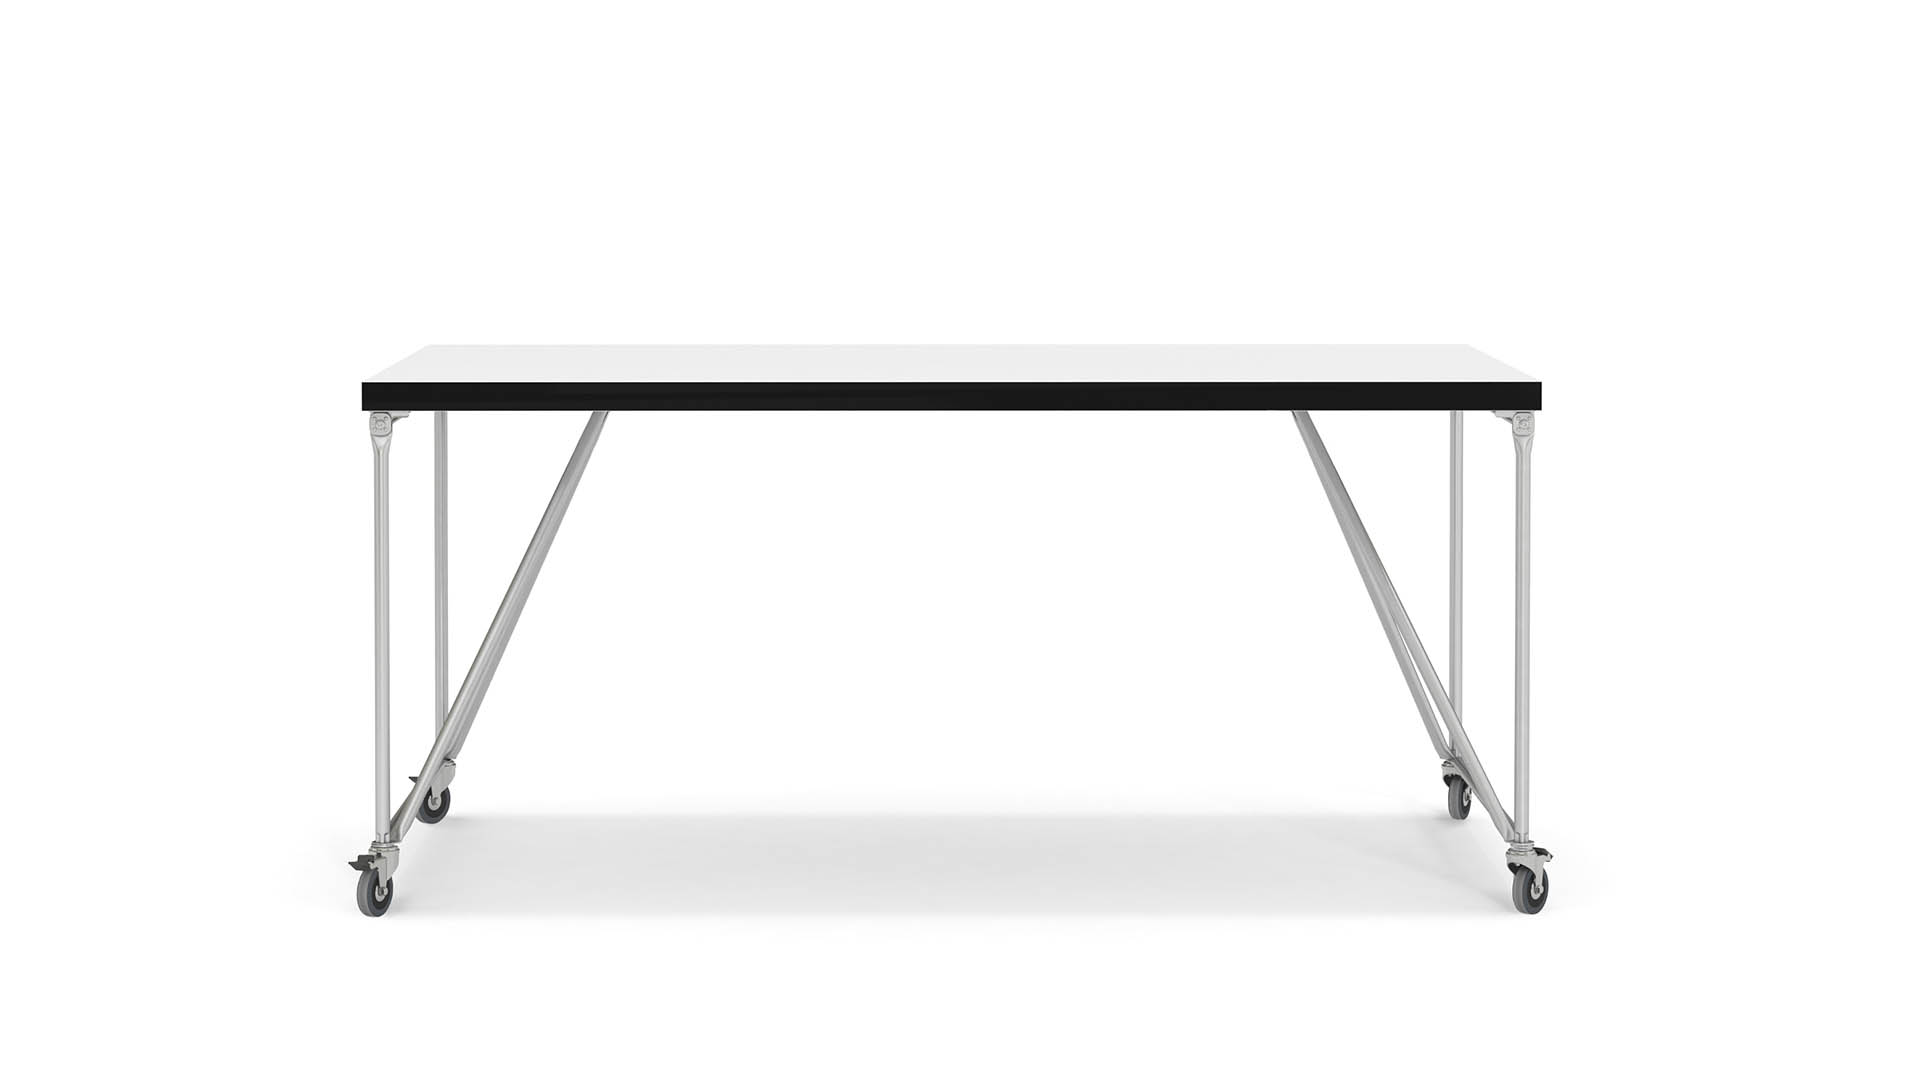 Rackpod Table System The Simple Desk By System 180